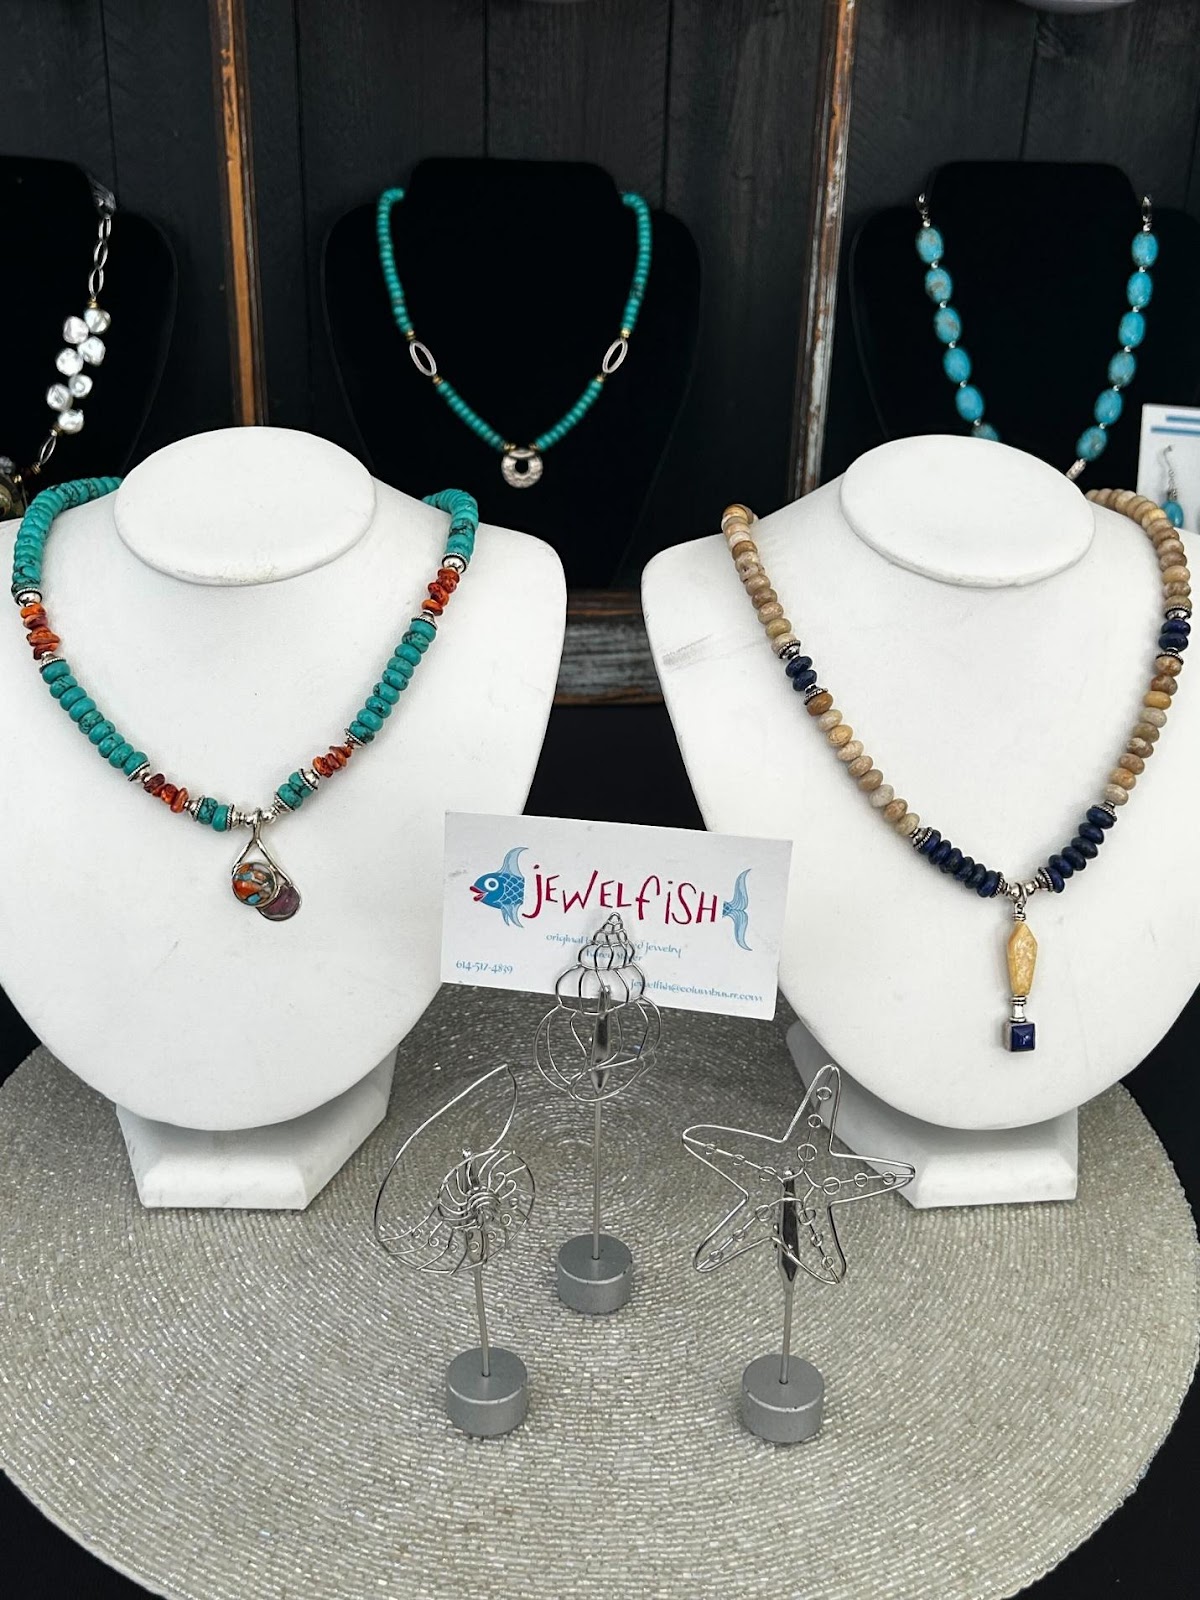 A group of necklaces on display

Description automatically generated